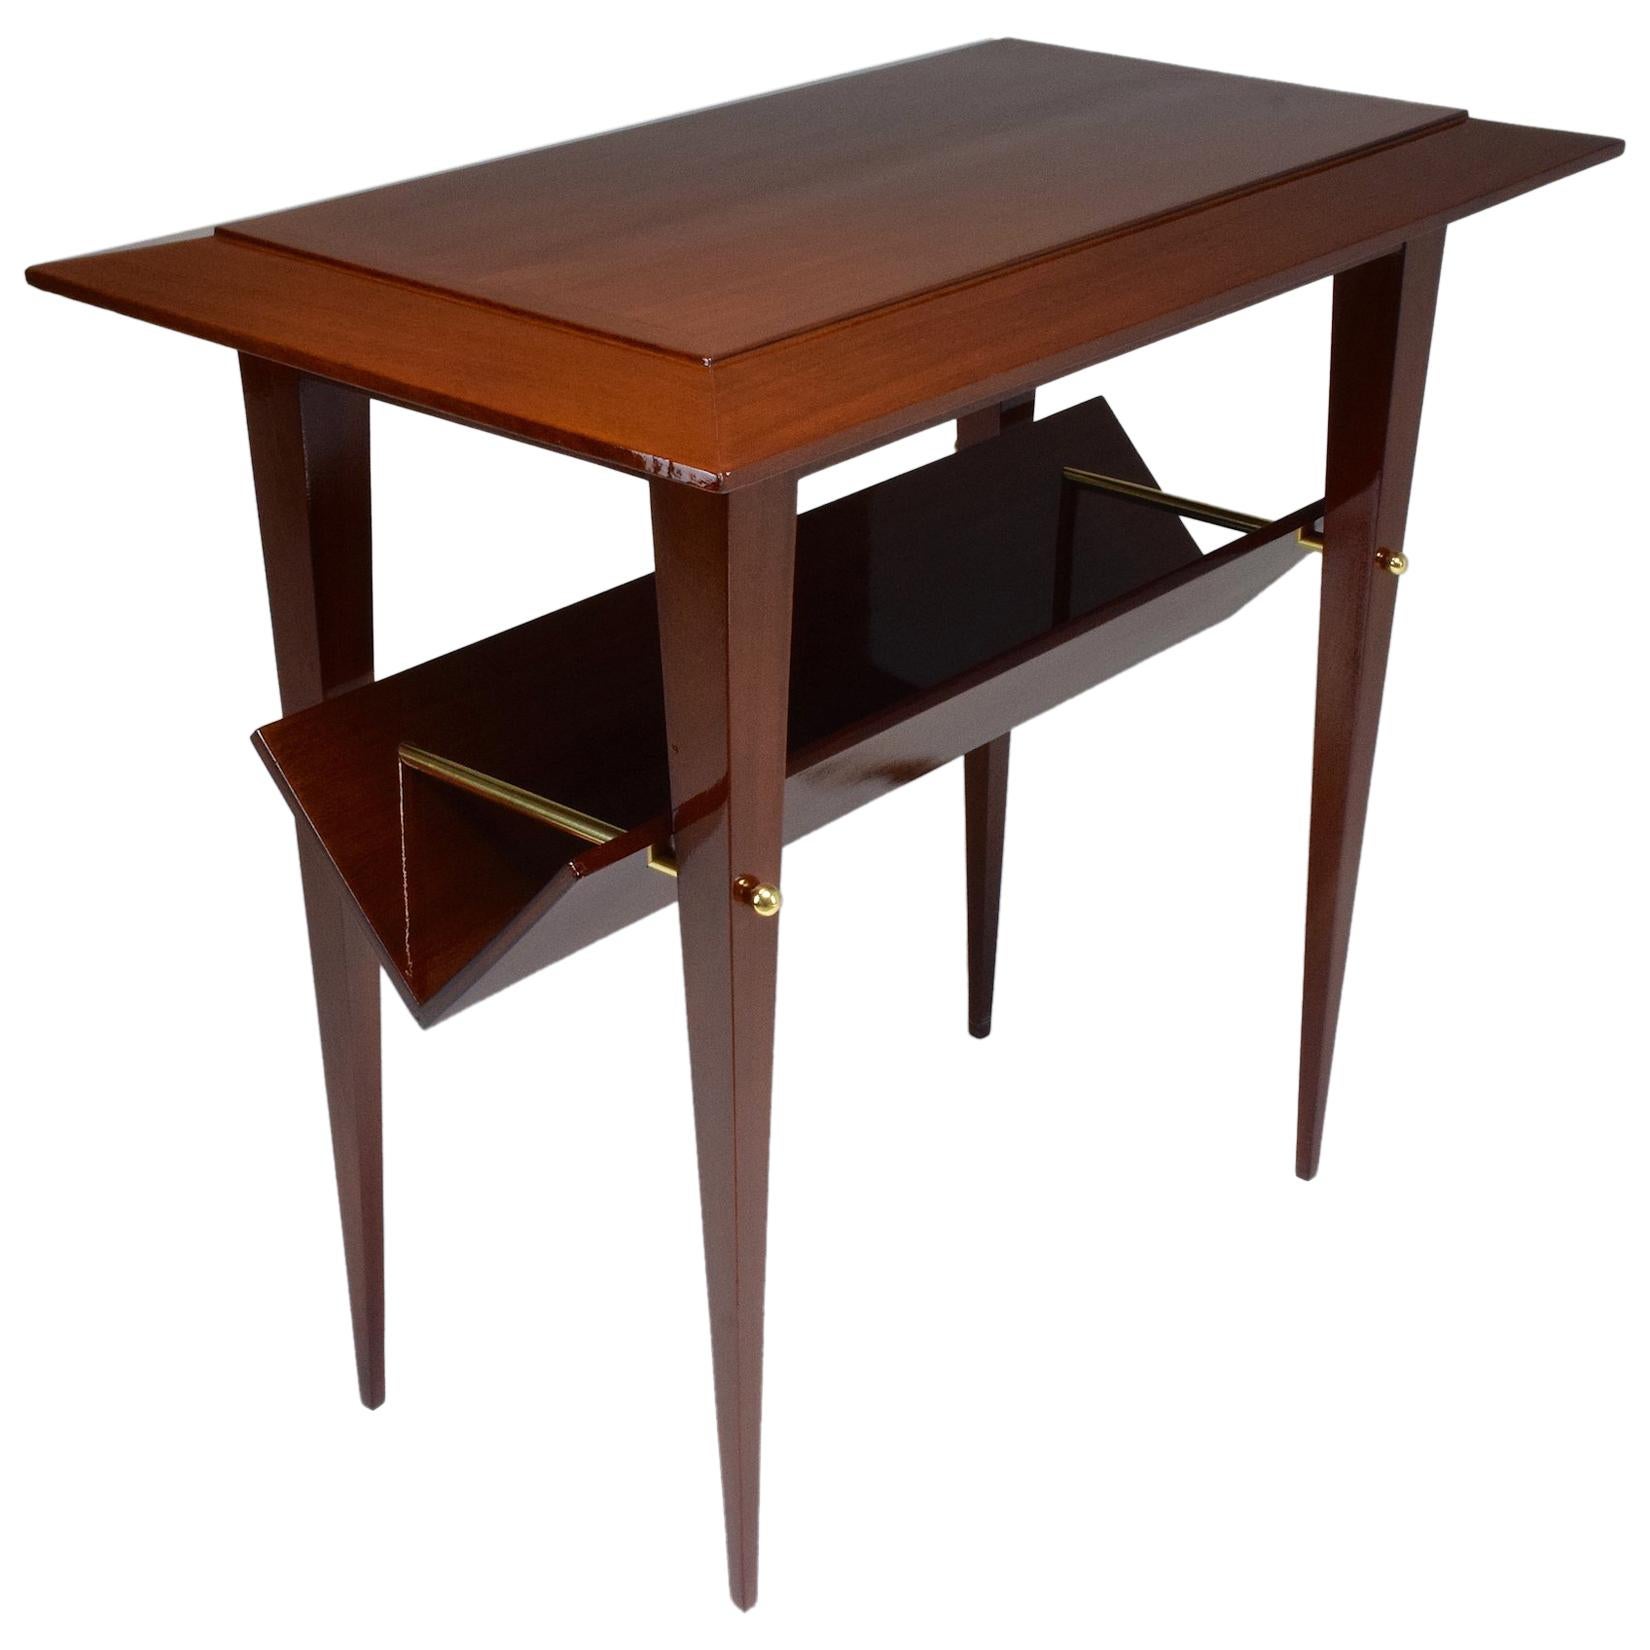 French Midcentury Mahogany Side Table Attributed to Raphael, 1950s